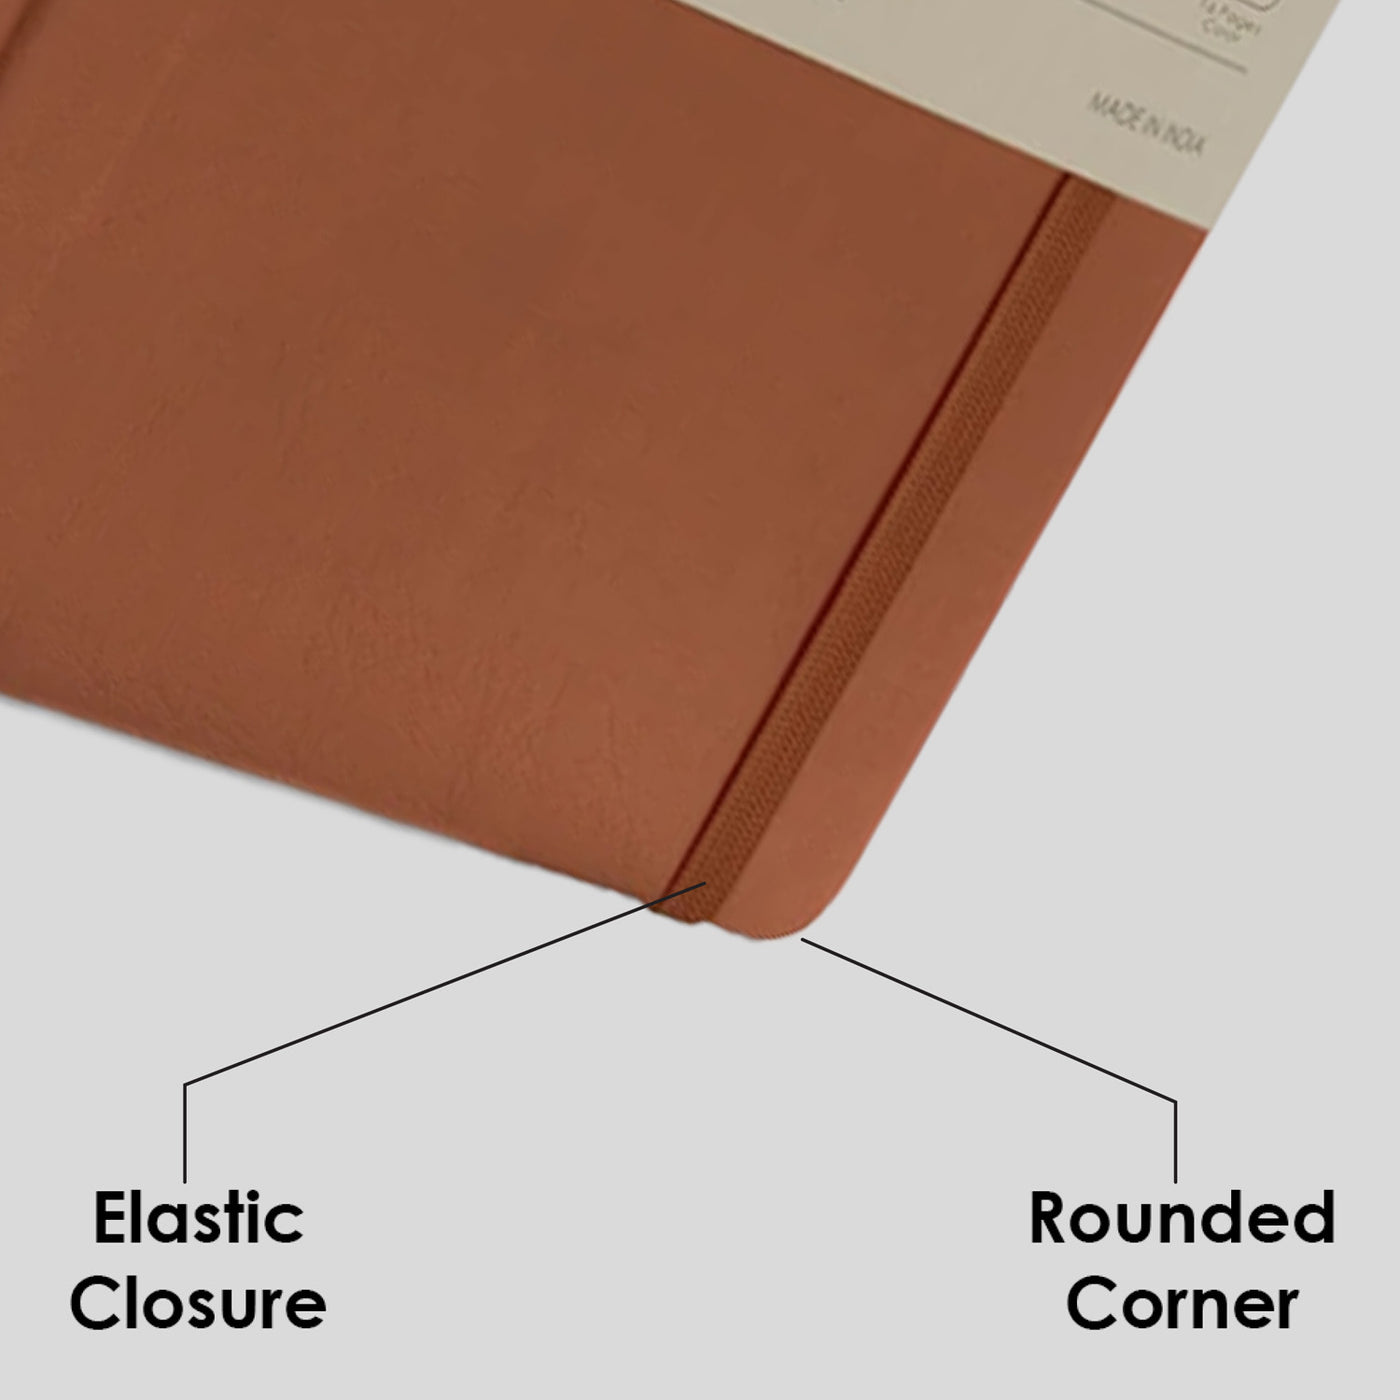 myPAPERCLIP Signature Series Soft Cover Notebook - Tan - A5 - Ruled